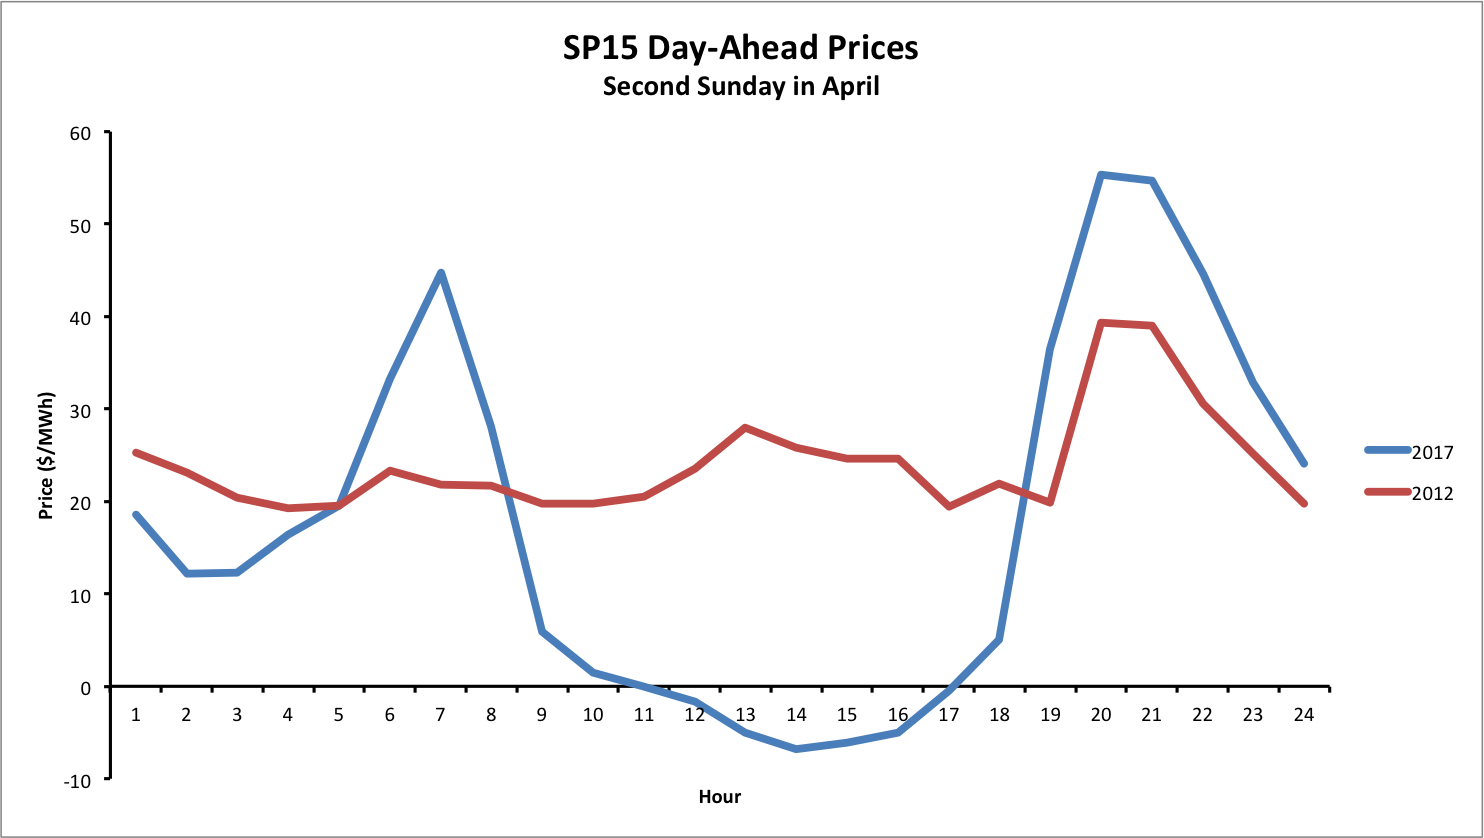 SP15 Day-Ahead Prices